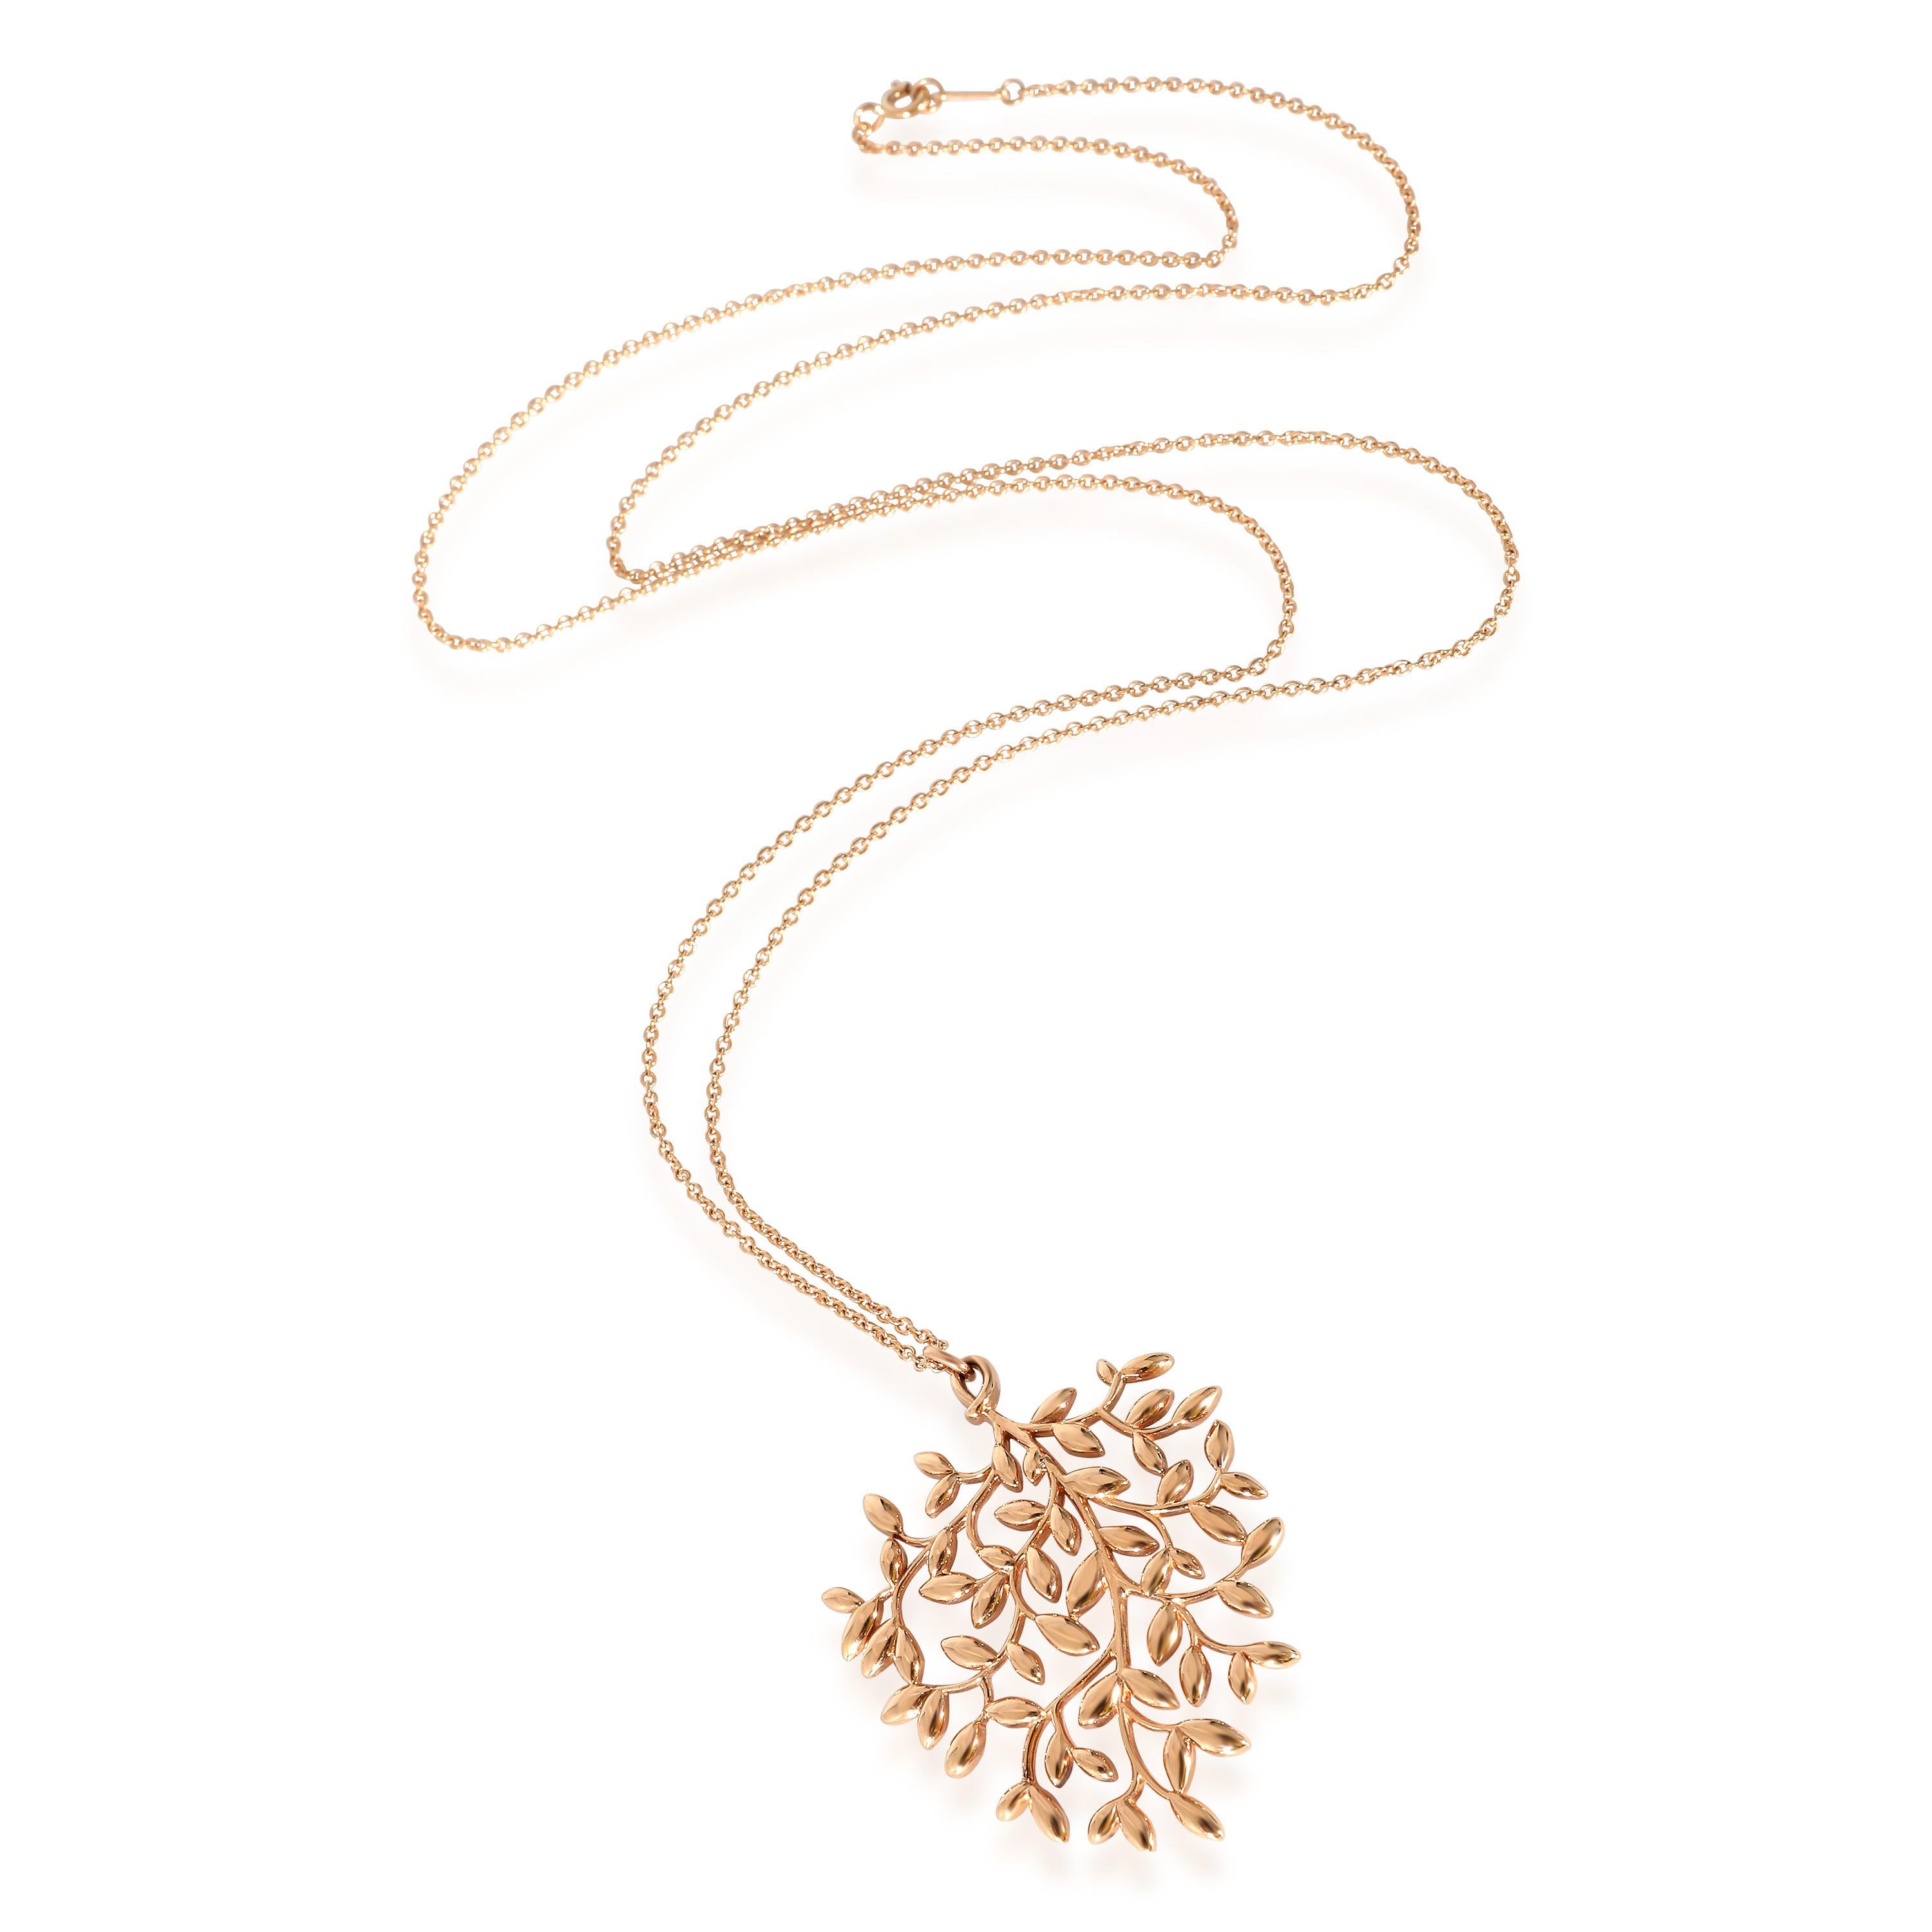 Tiffany & Co. Paloma Picasso Large Olive Leaf Pendant in 18K Rose Gold

PRIMARY DETAILS
SKU: 132595
Listing Title: Tiffany & Co. Paloma Picasso Large Olive Leaf Pendant in 18K Rose Gold
Condition Description: The daughter of artist Pablo Picasso and